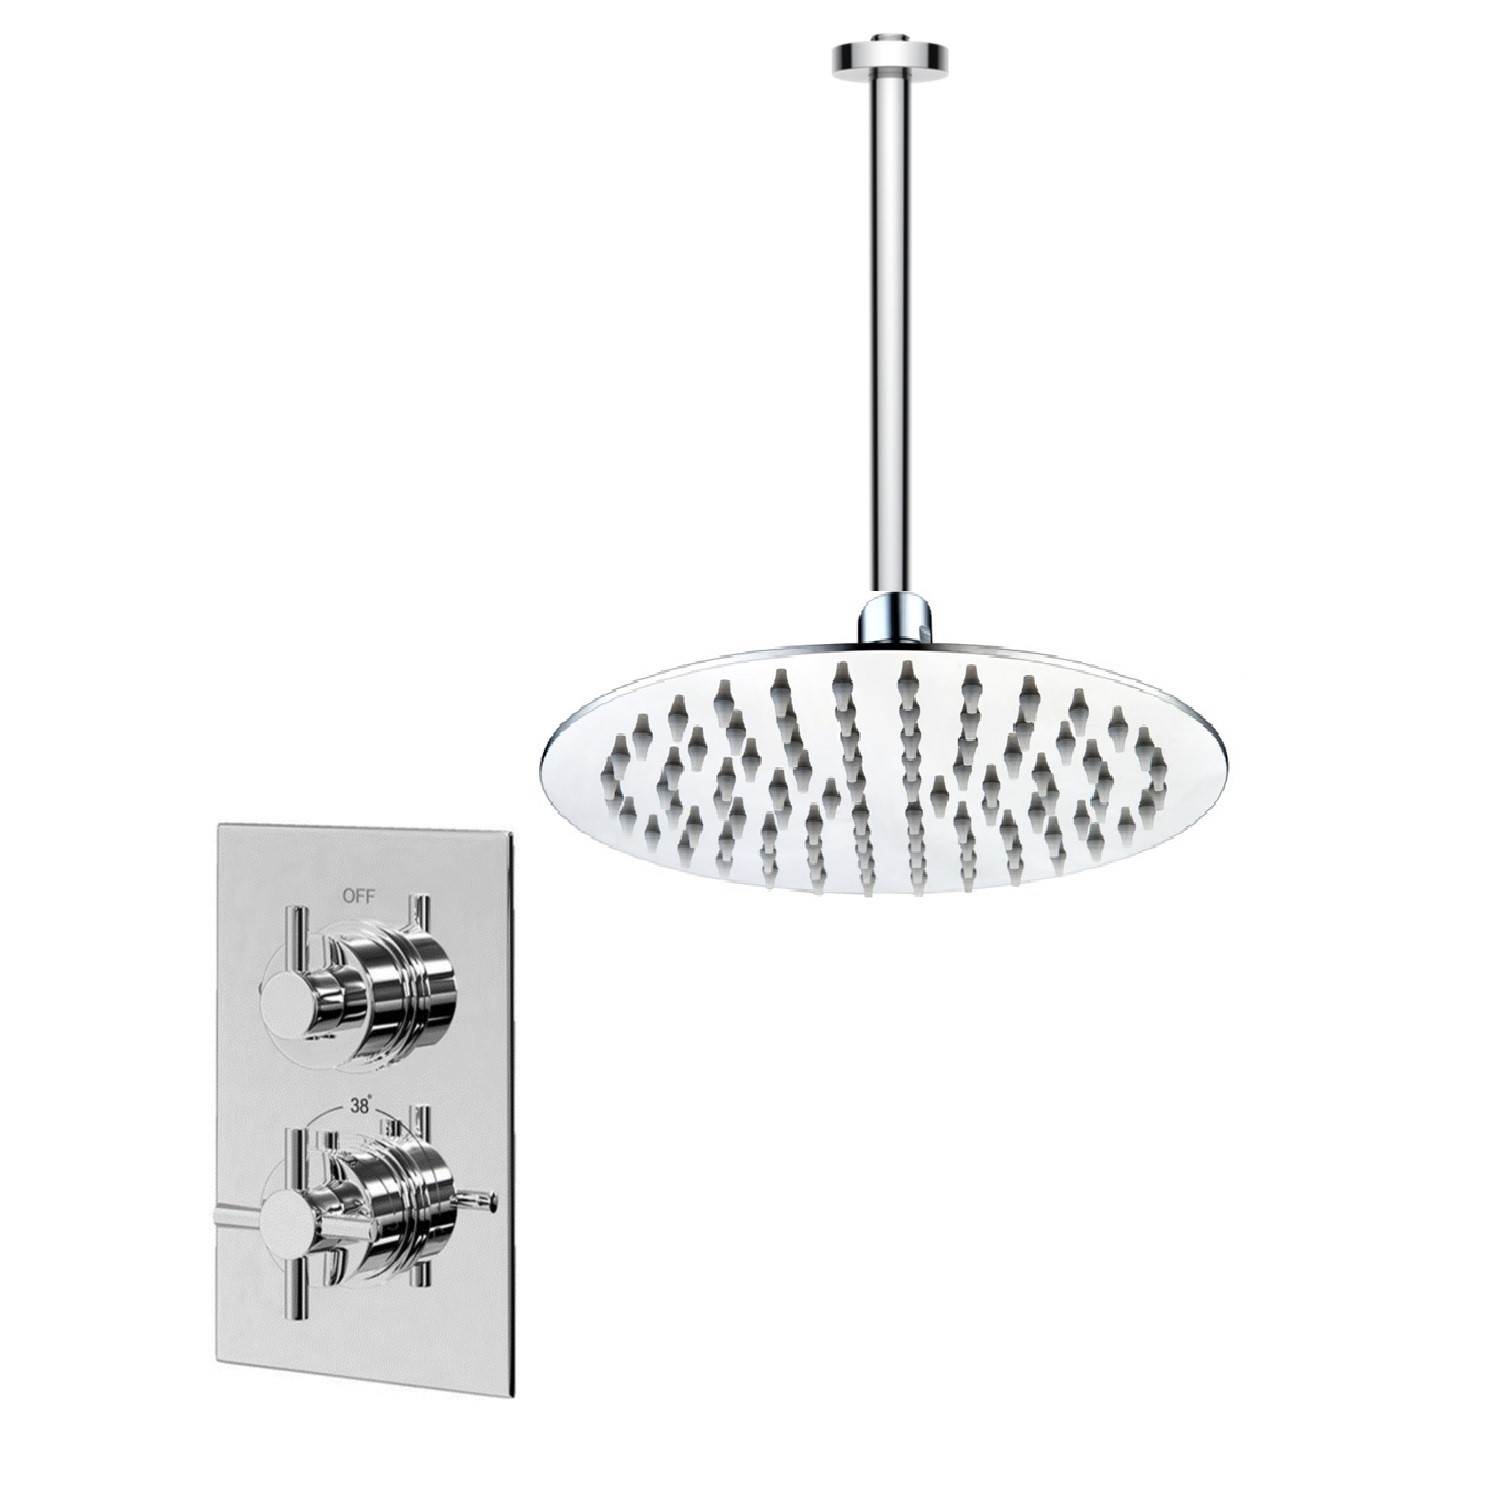 Concealed Thermostatic Mixer Shower with Slim Ceiling Rainfall Head - EcoStyle